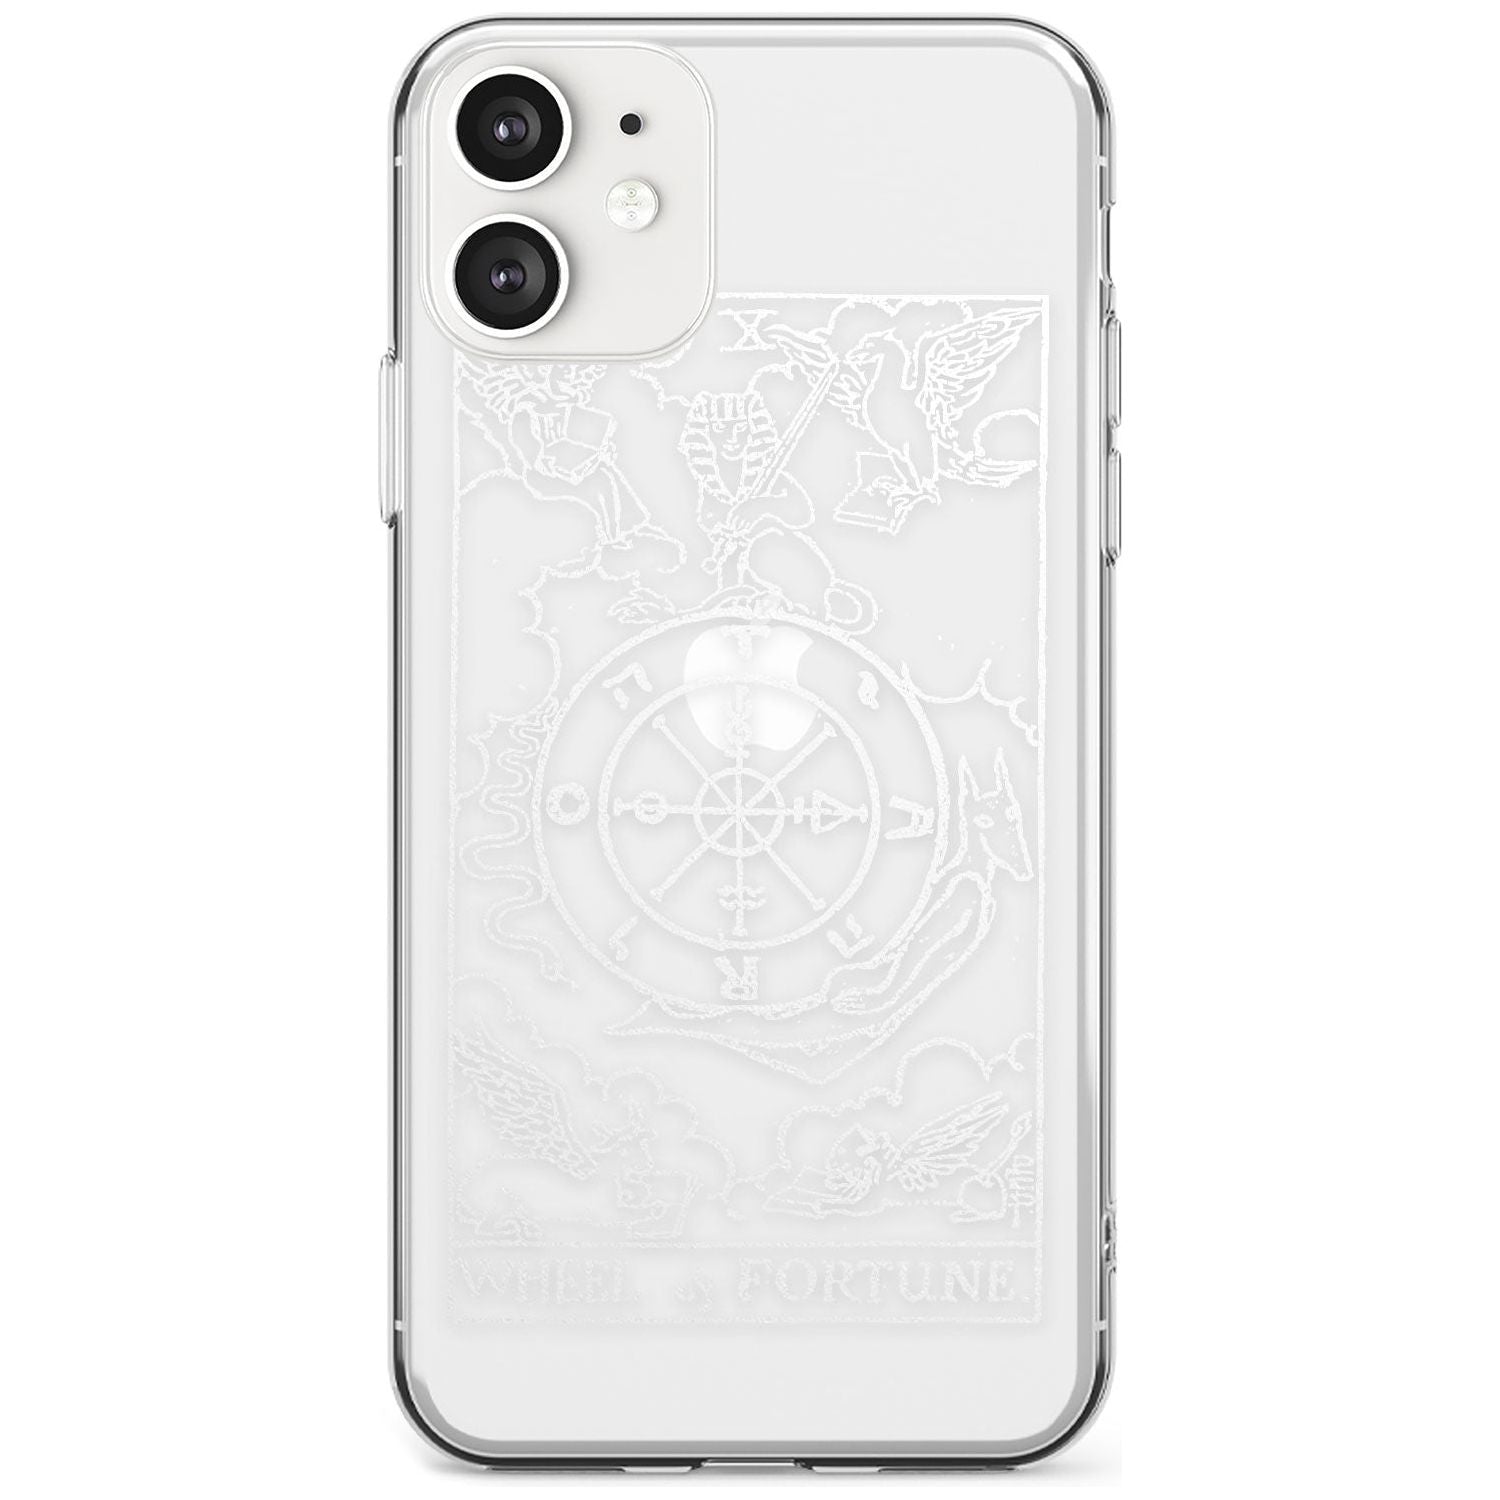 Wheel of Fortune Tarot Card - White Transparent Black Impact Phone Case for iPhone 11